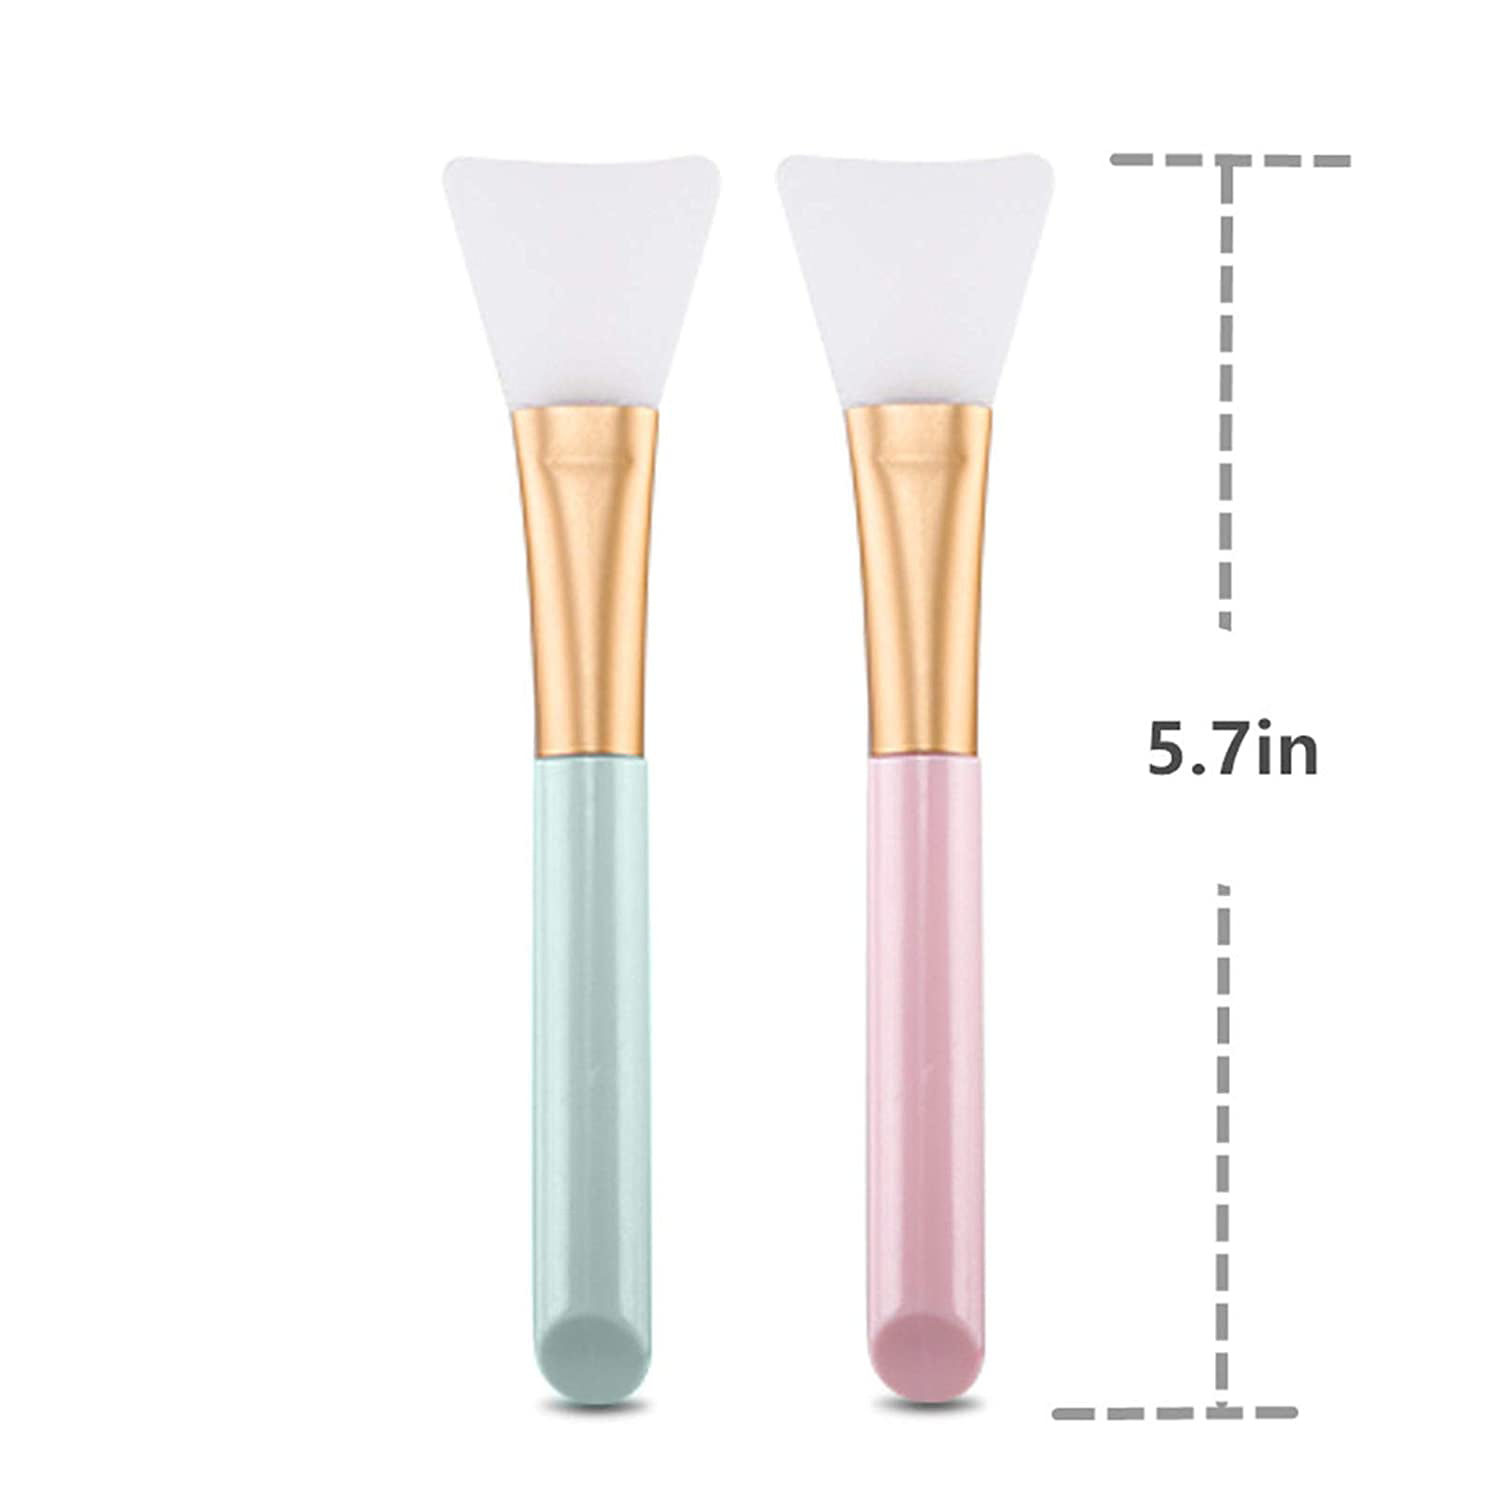 Brush Green/Pink Mud Hairless Tool Body 2 Mask Beauty PCS Facial Silicone Butter Body made Applicator of Face Silicone,used with Soft Lotion Brush,Mask Mask tools, for Applicator And